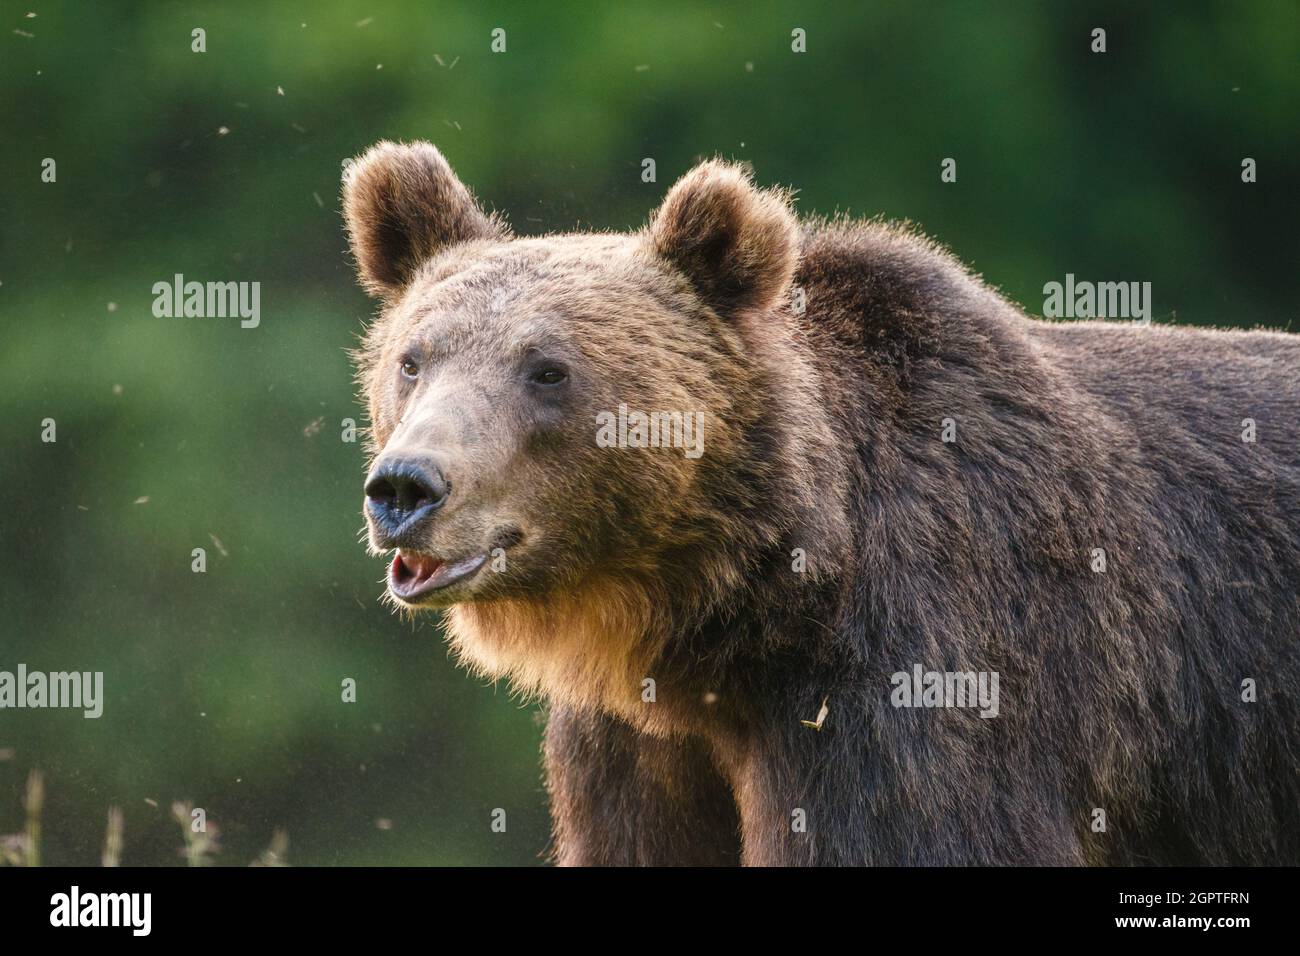 Carpathian brown bear portrait, in natural environment in the woods of Romania, with green forest background. Stock Photo